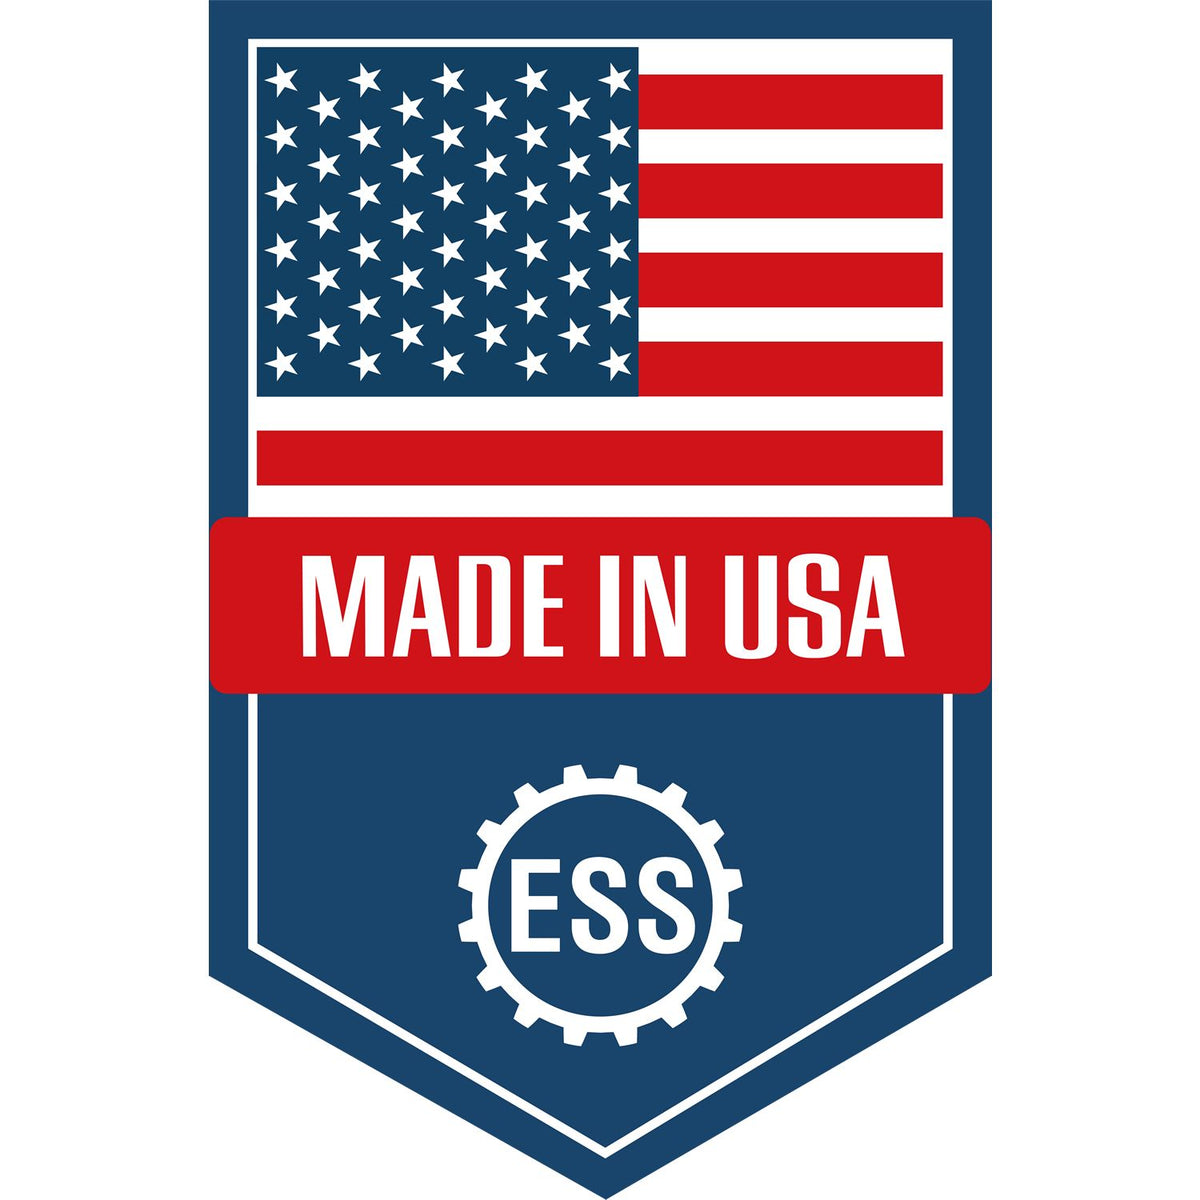 An icon or graphic with an American flag and text reading Made in USA for the Gift North Carolina Landscape Architect Seal